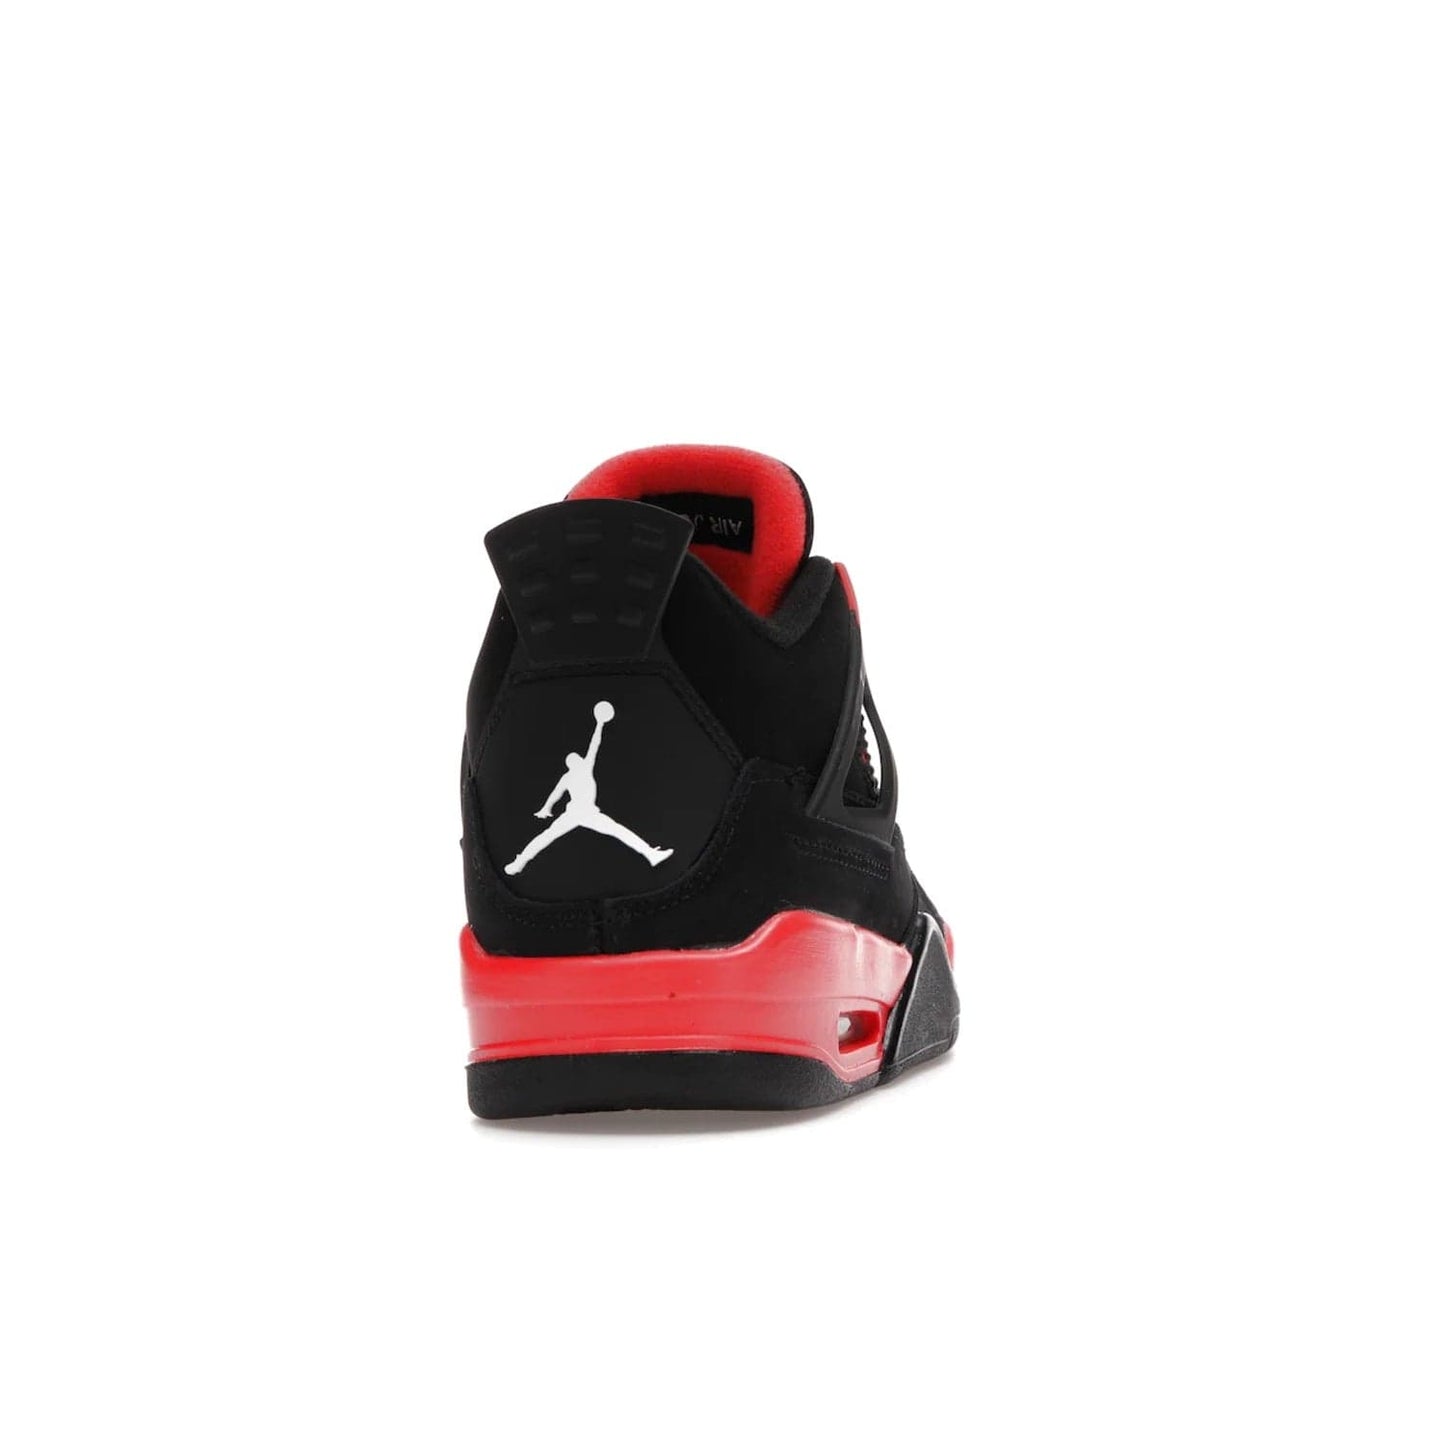 Jordan 4 Retro Red Thunder (GS) - Image 29 - Only at www.BallersClubKickz.com - The Air Jordan 4 Retro Red Thunder GS features a stylish black and crimson upper with a Jumpman logo. Athletic midsole with Air bubbles for cushioning and black rubber outsole with iconic motif complete this classic sneaker.